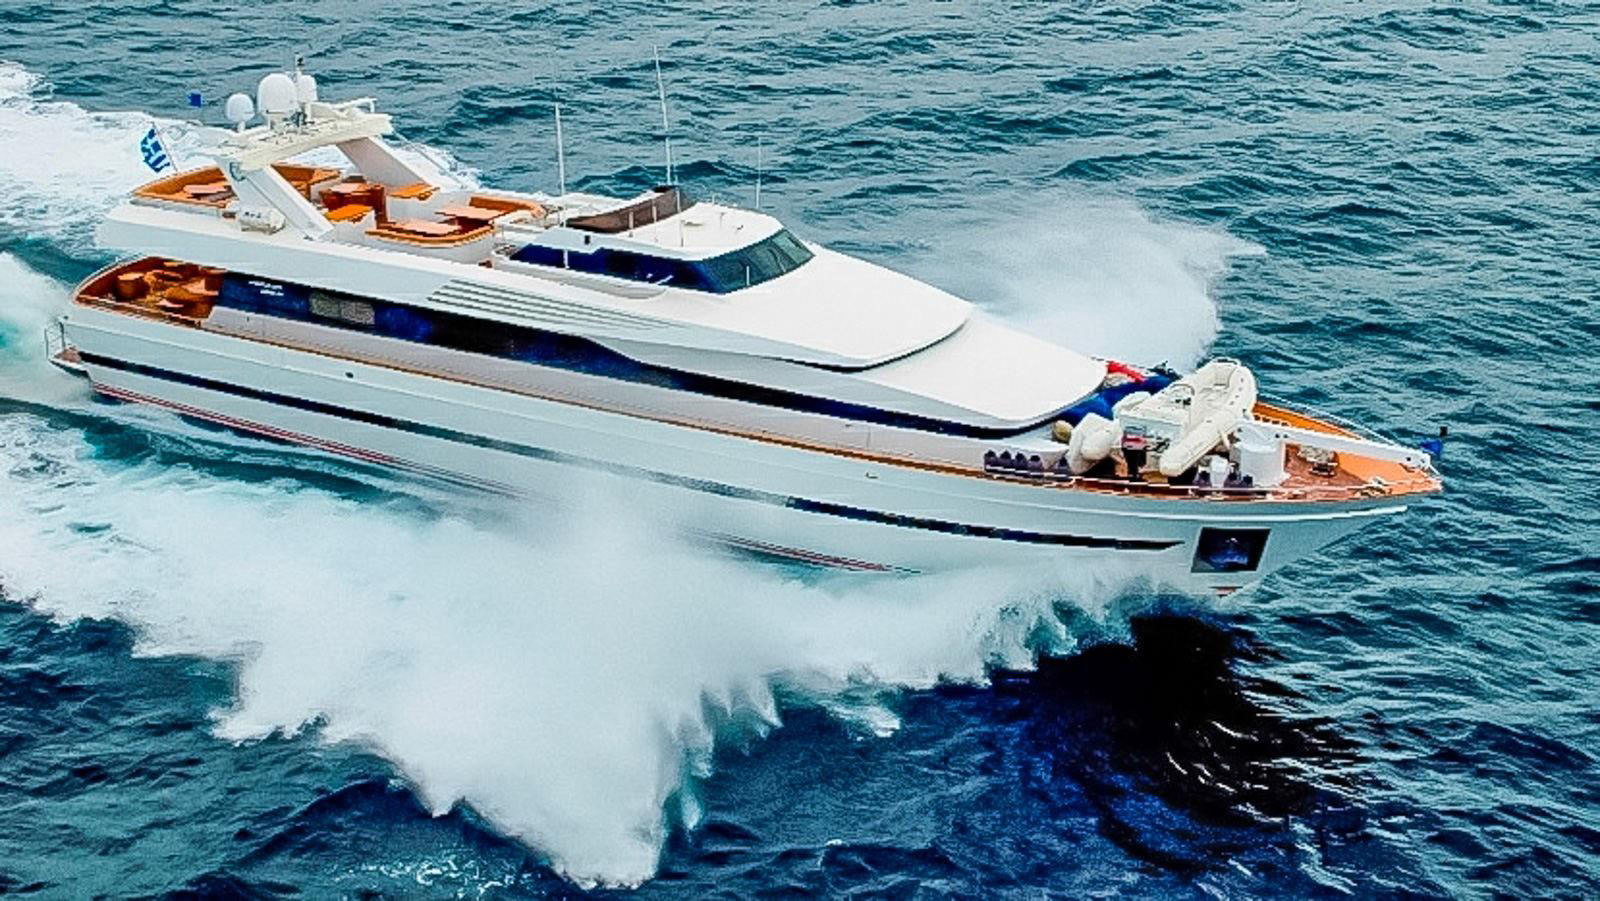 Make the Most of Your Private Yacht Rental Tour in Dubai